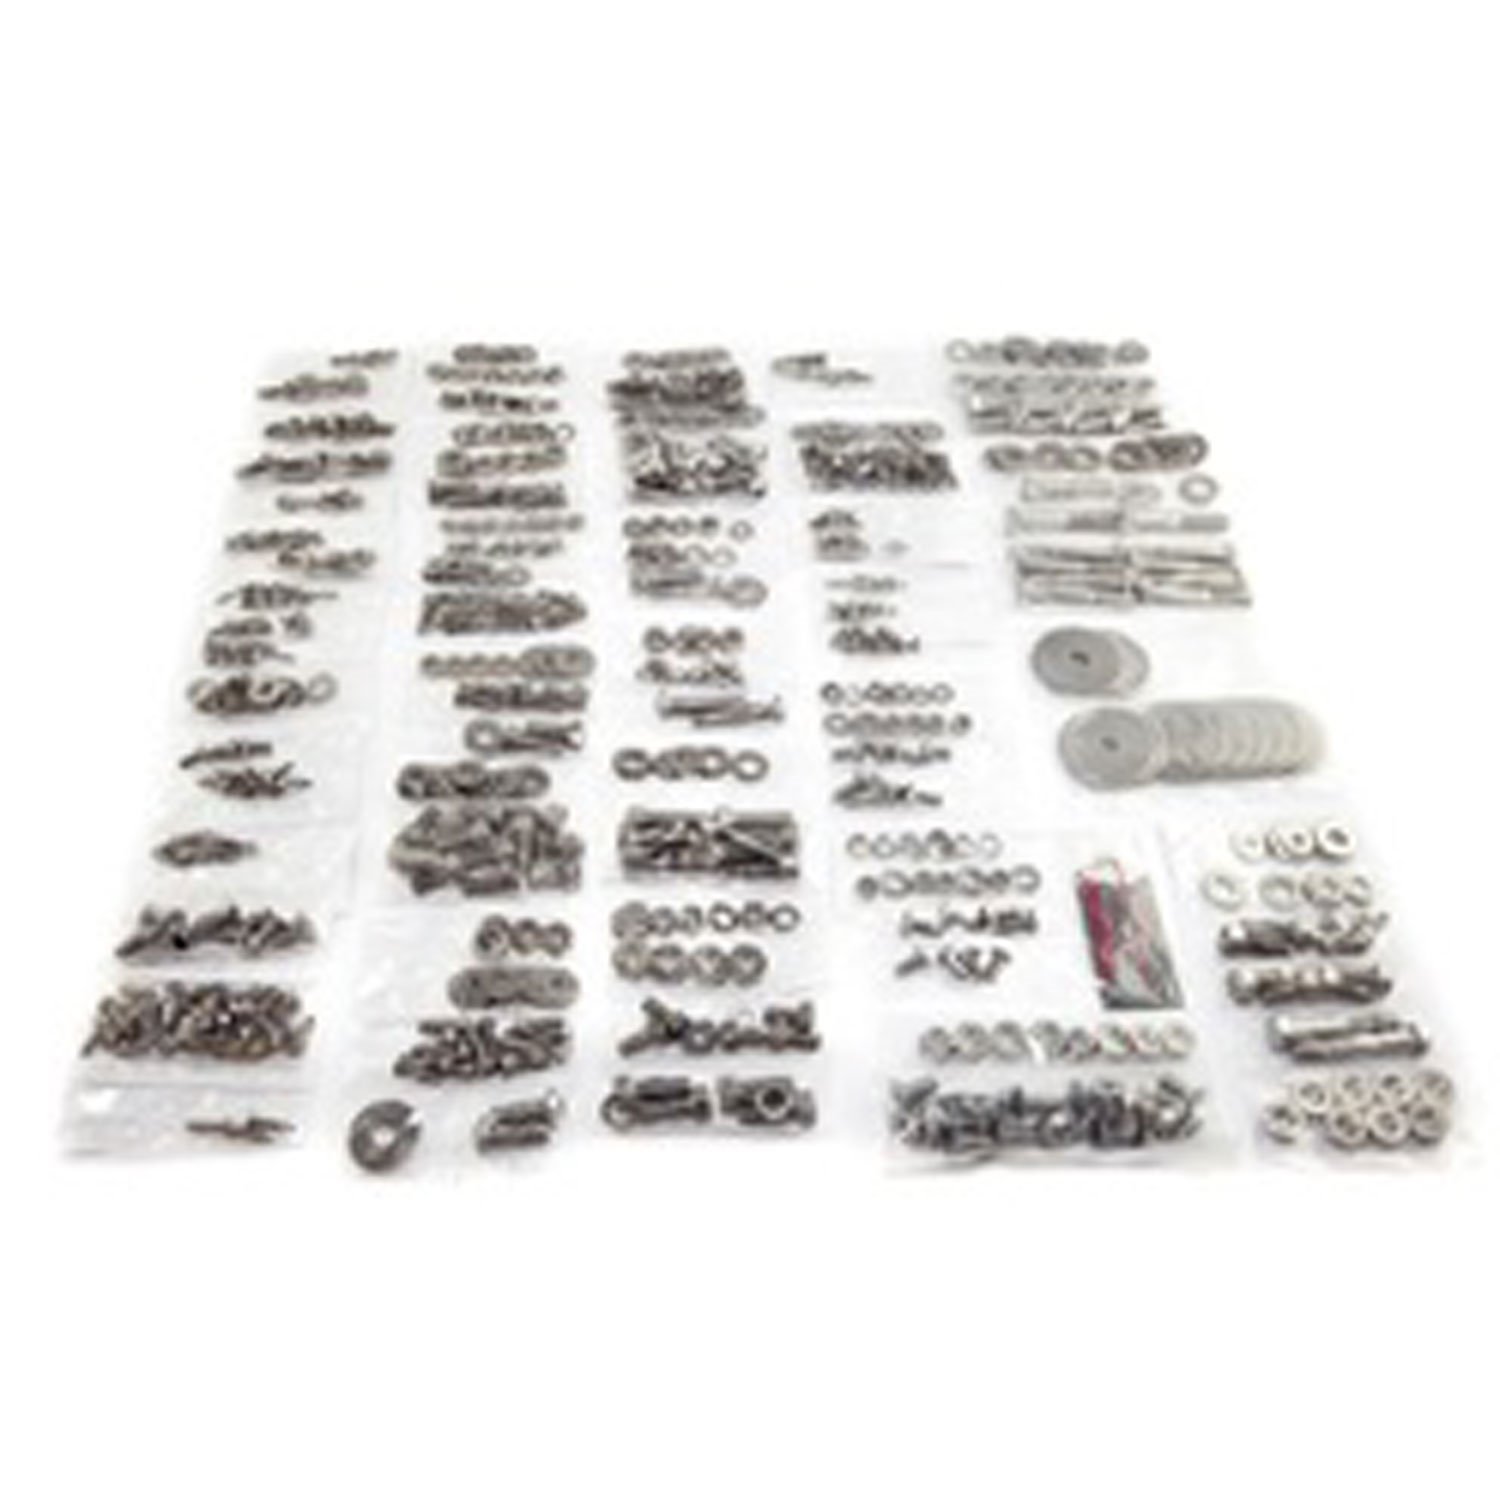 This 785 piece stainless steel body fastener kit from Omix-ADA gives you all the fasteners to rebuil